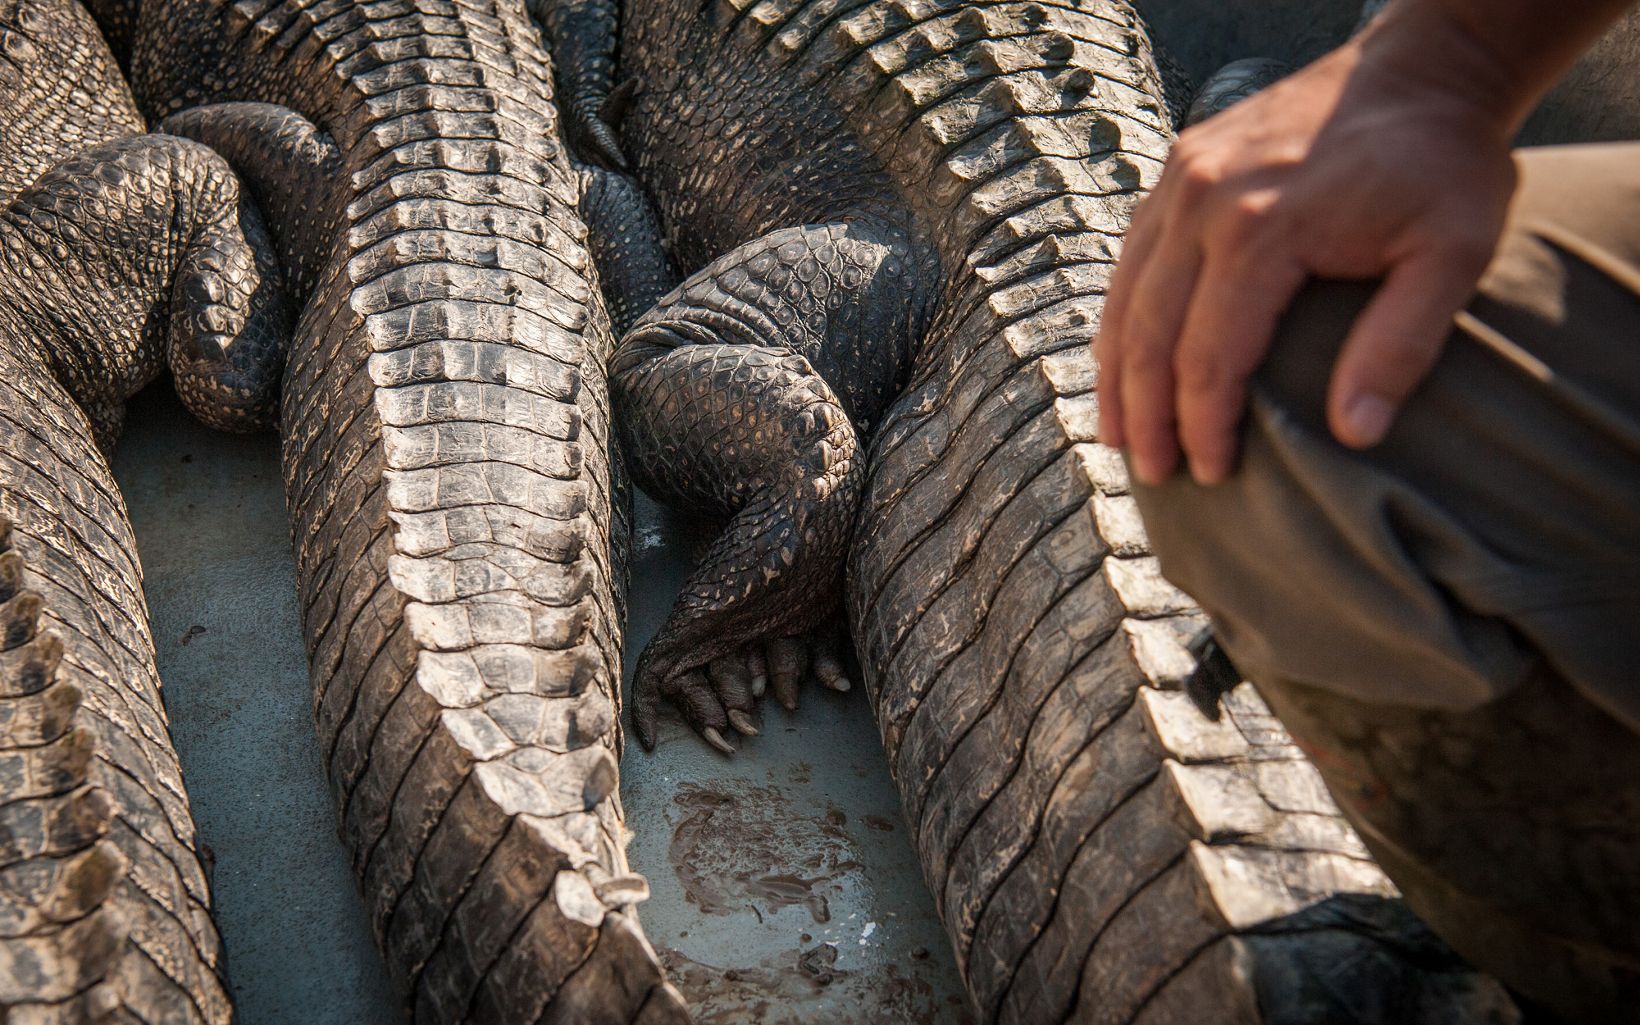 
                
                  Alligator Hunting Caught alligators on a boat during a hunt near Bayou Sorrel in the Atchafalaya Basin. Alligator hunting is a licensed sport in the state of Louisiana. 



                  © Rory Doyle
                
              